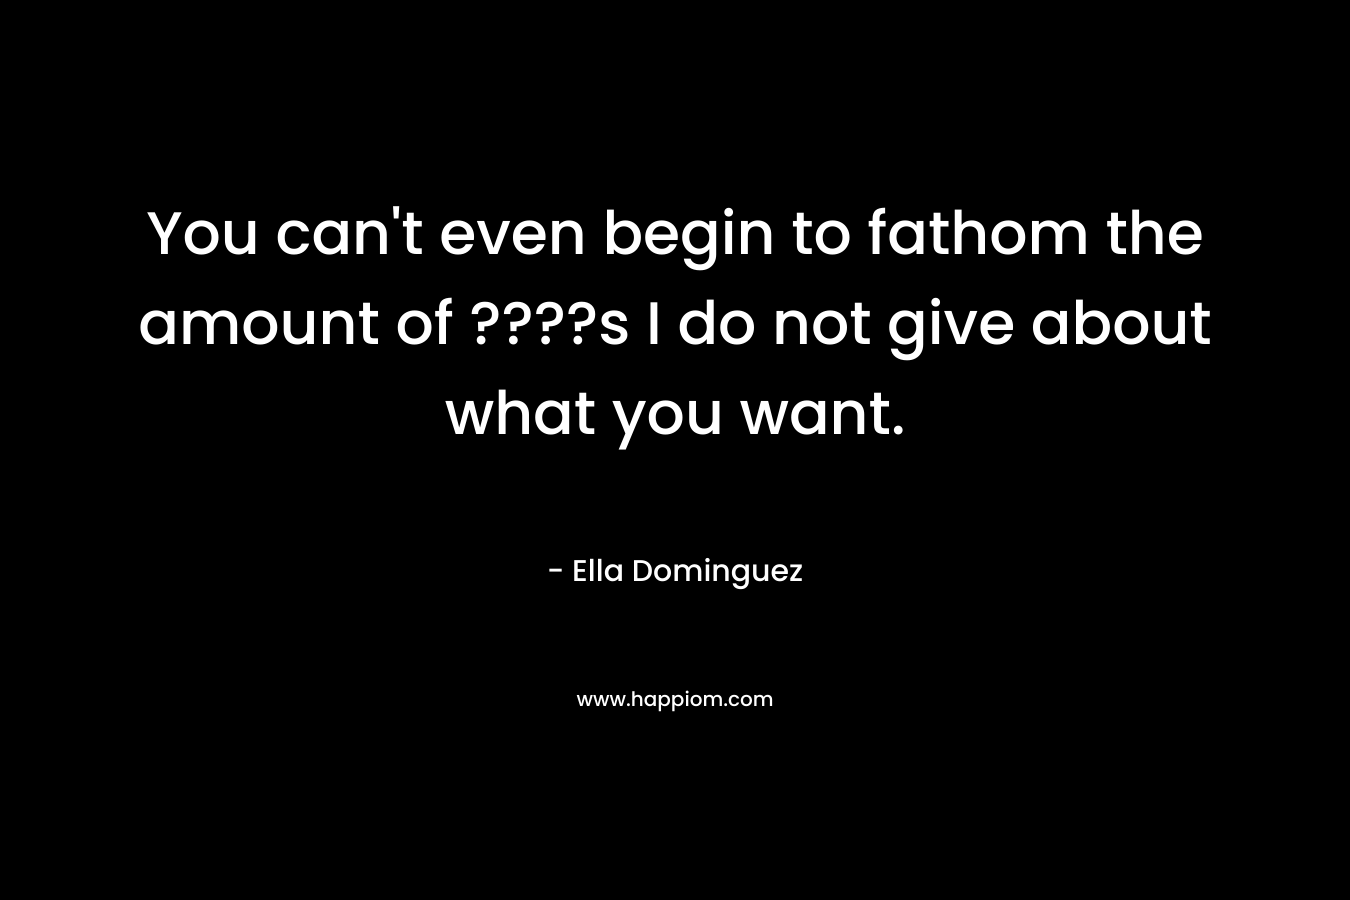 You can’t even begin to fathom the amount of ????s I do not give about what you want. – Ella Dominguez